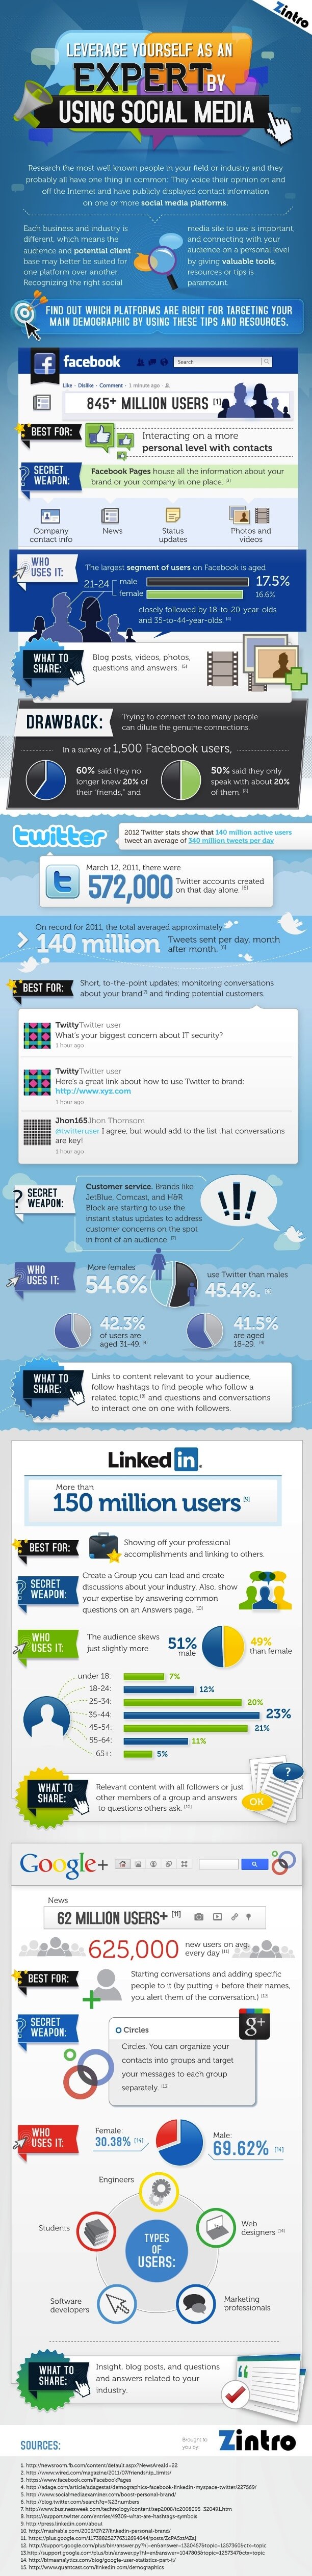 How to Leverage your Social Media Presence as an Expert? [INFOGRAPHIC]